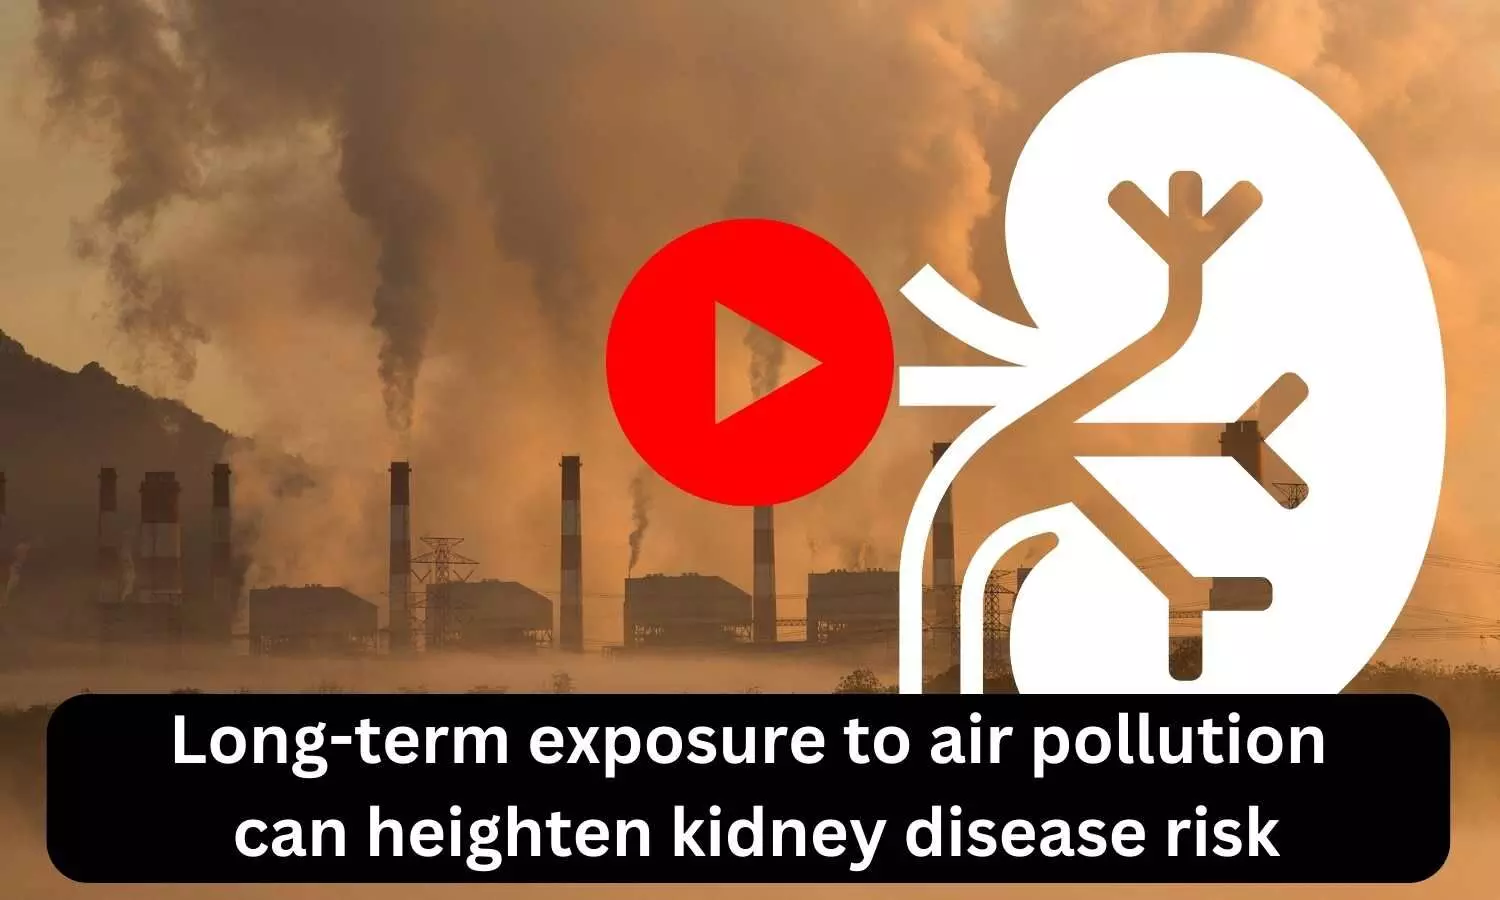 Long-term exposure to air pollution can heighten kidney disease risk